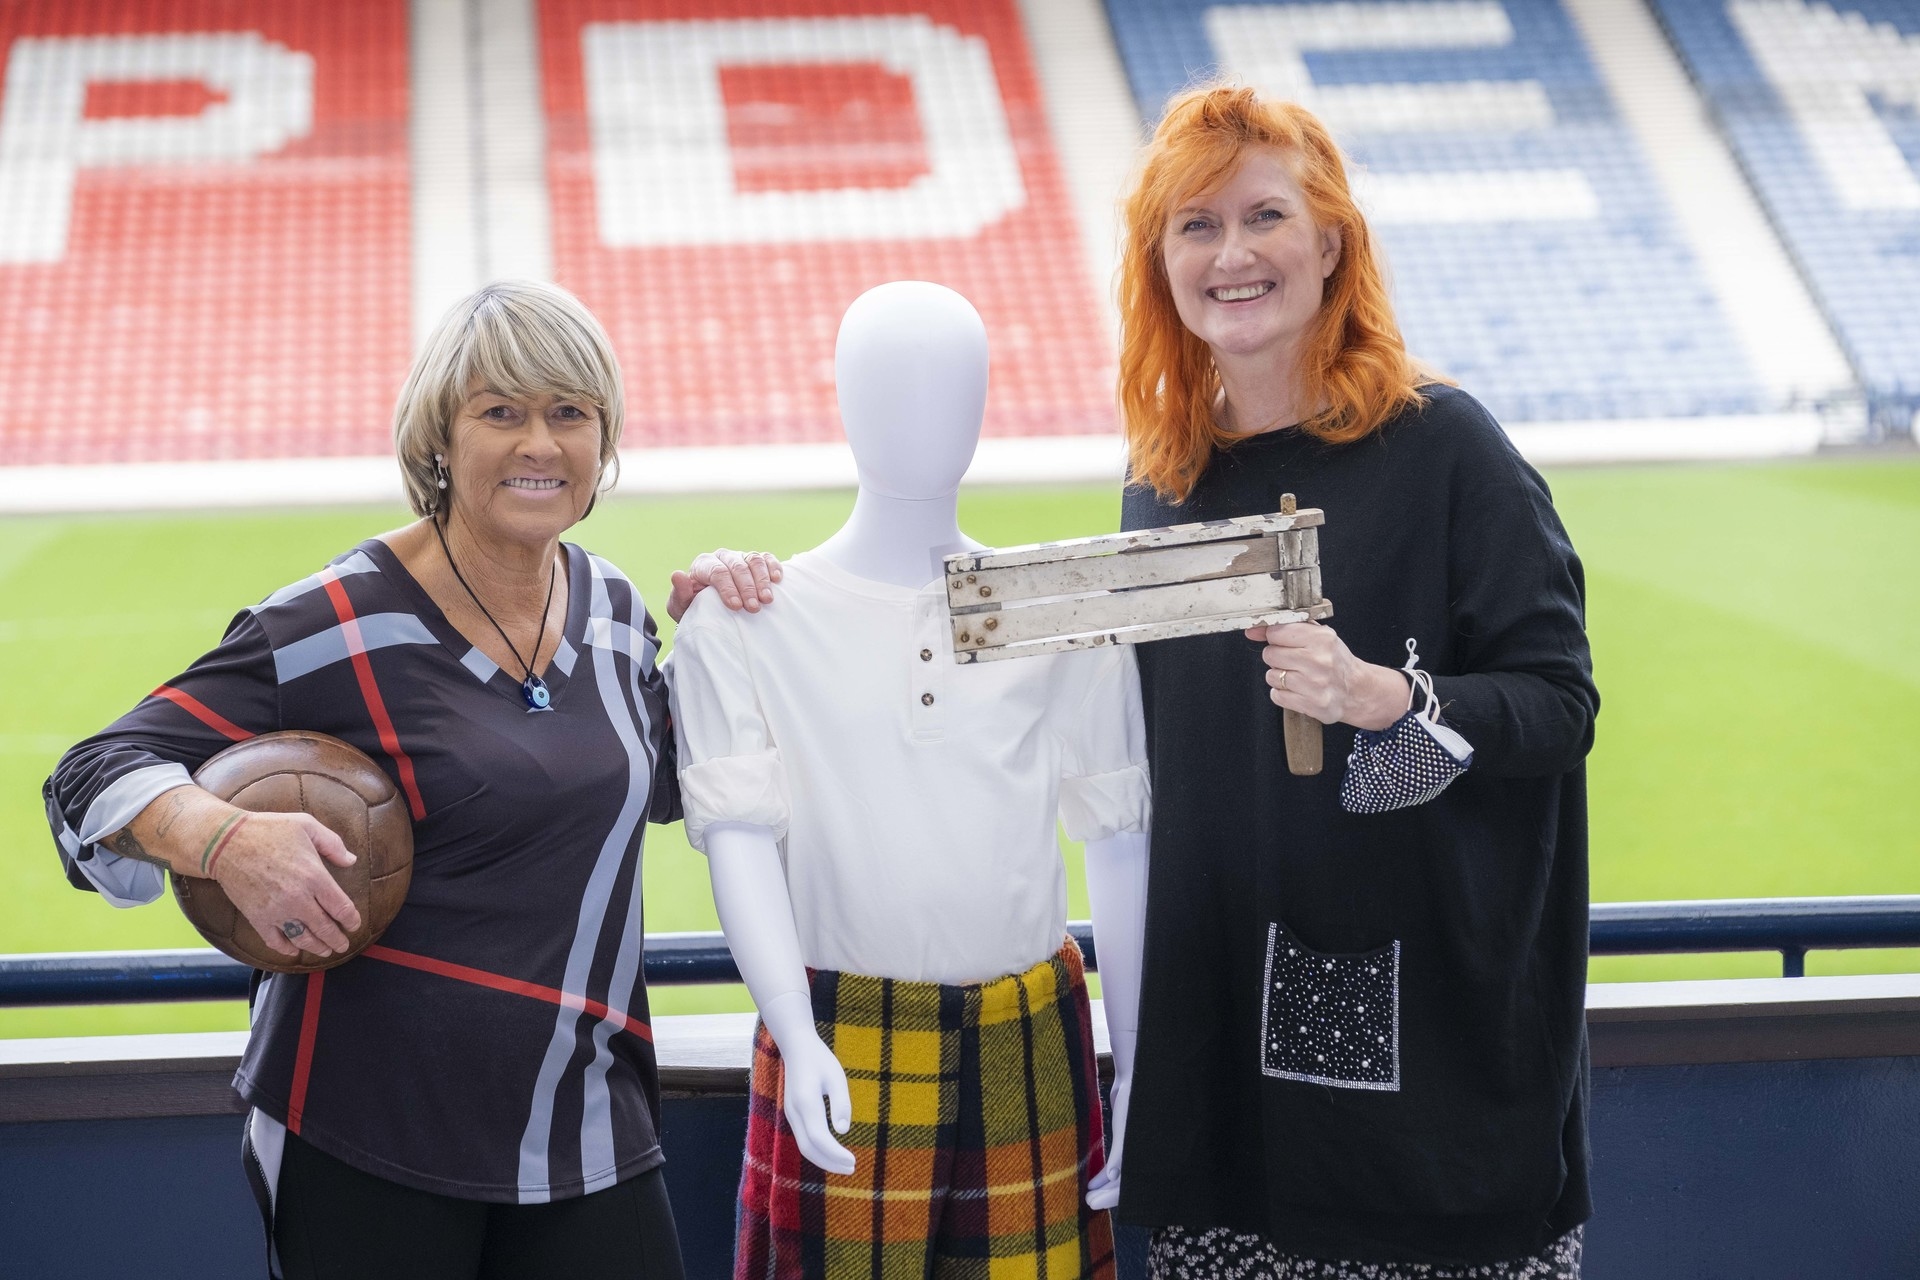 Scotland football hall of famer Rose Reilly and Eddi Reader, whose grandmother captained Rutherglen.